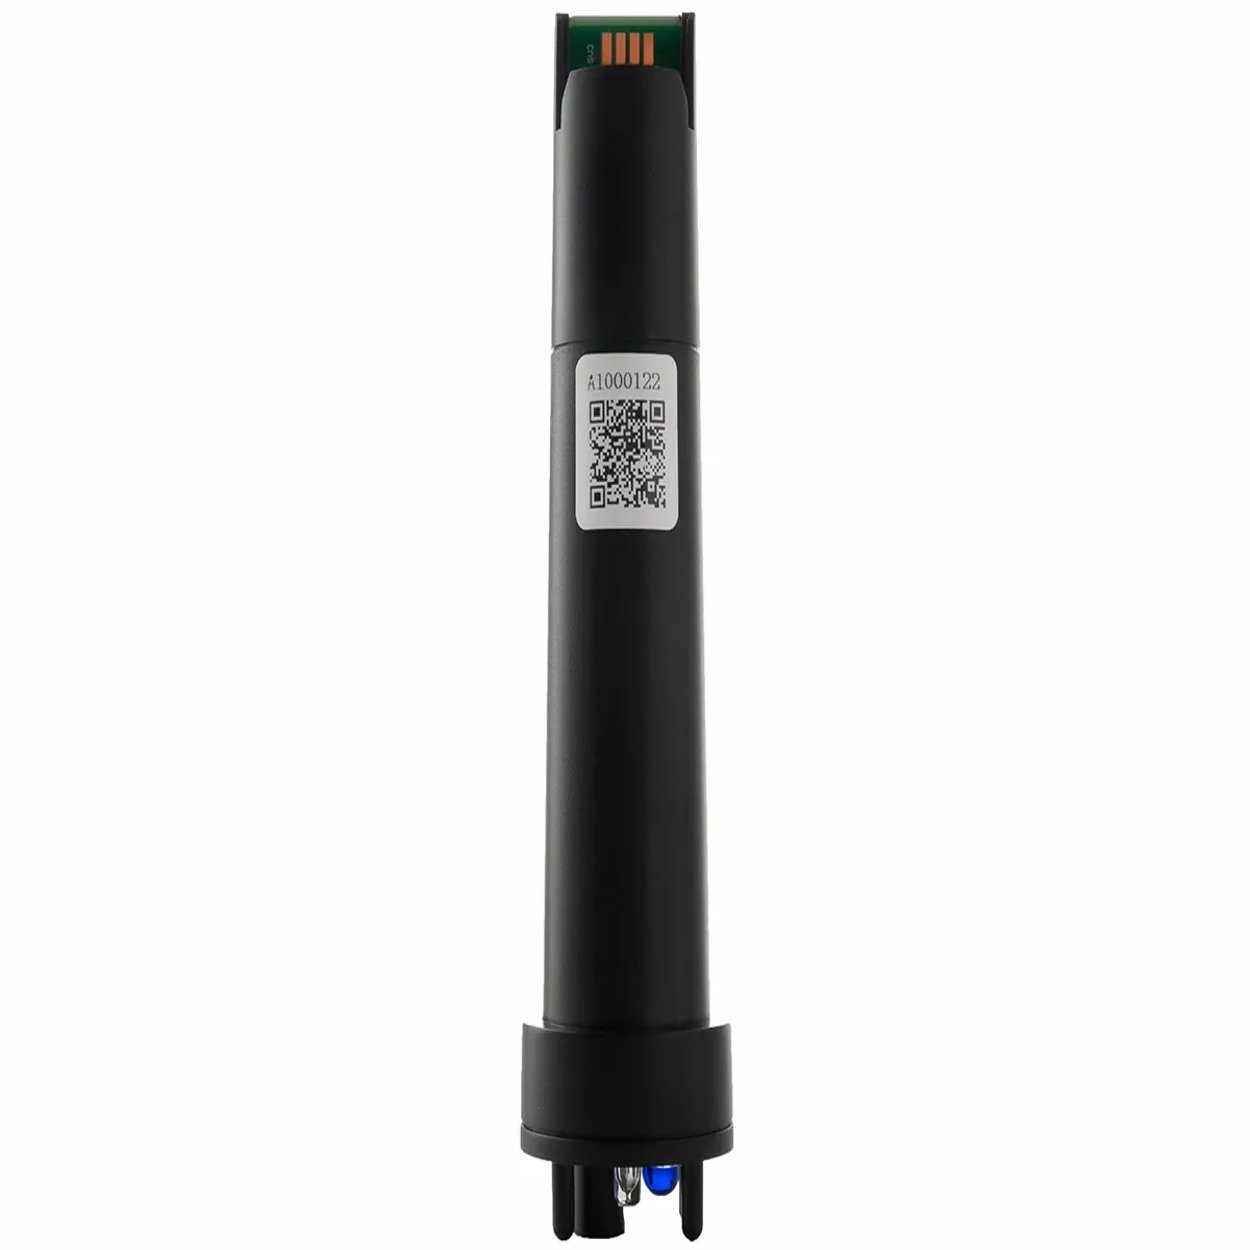 Replacement AU probe for Blue Connect Plus - 4in1 Probe